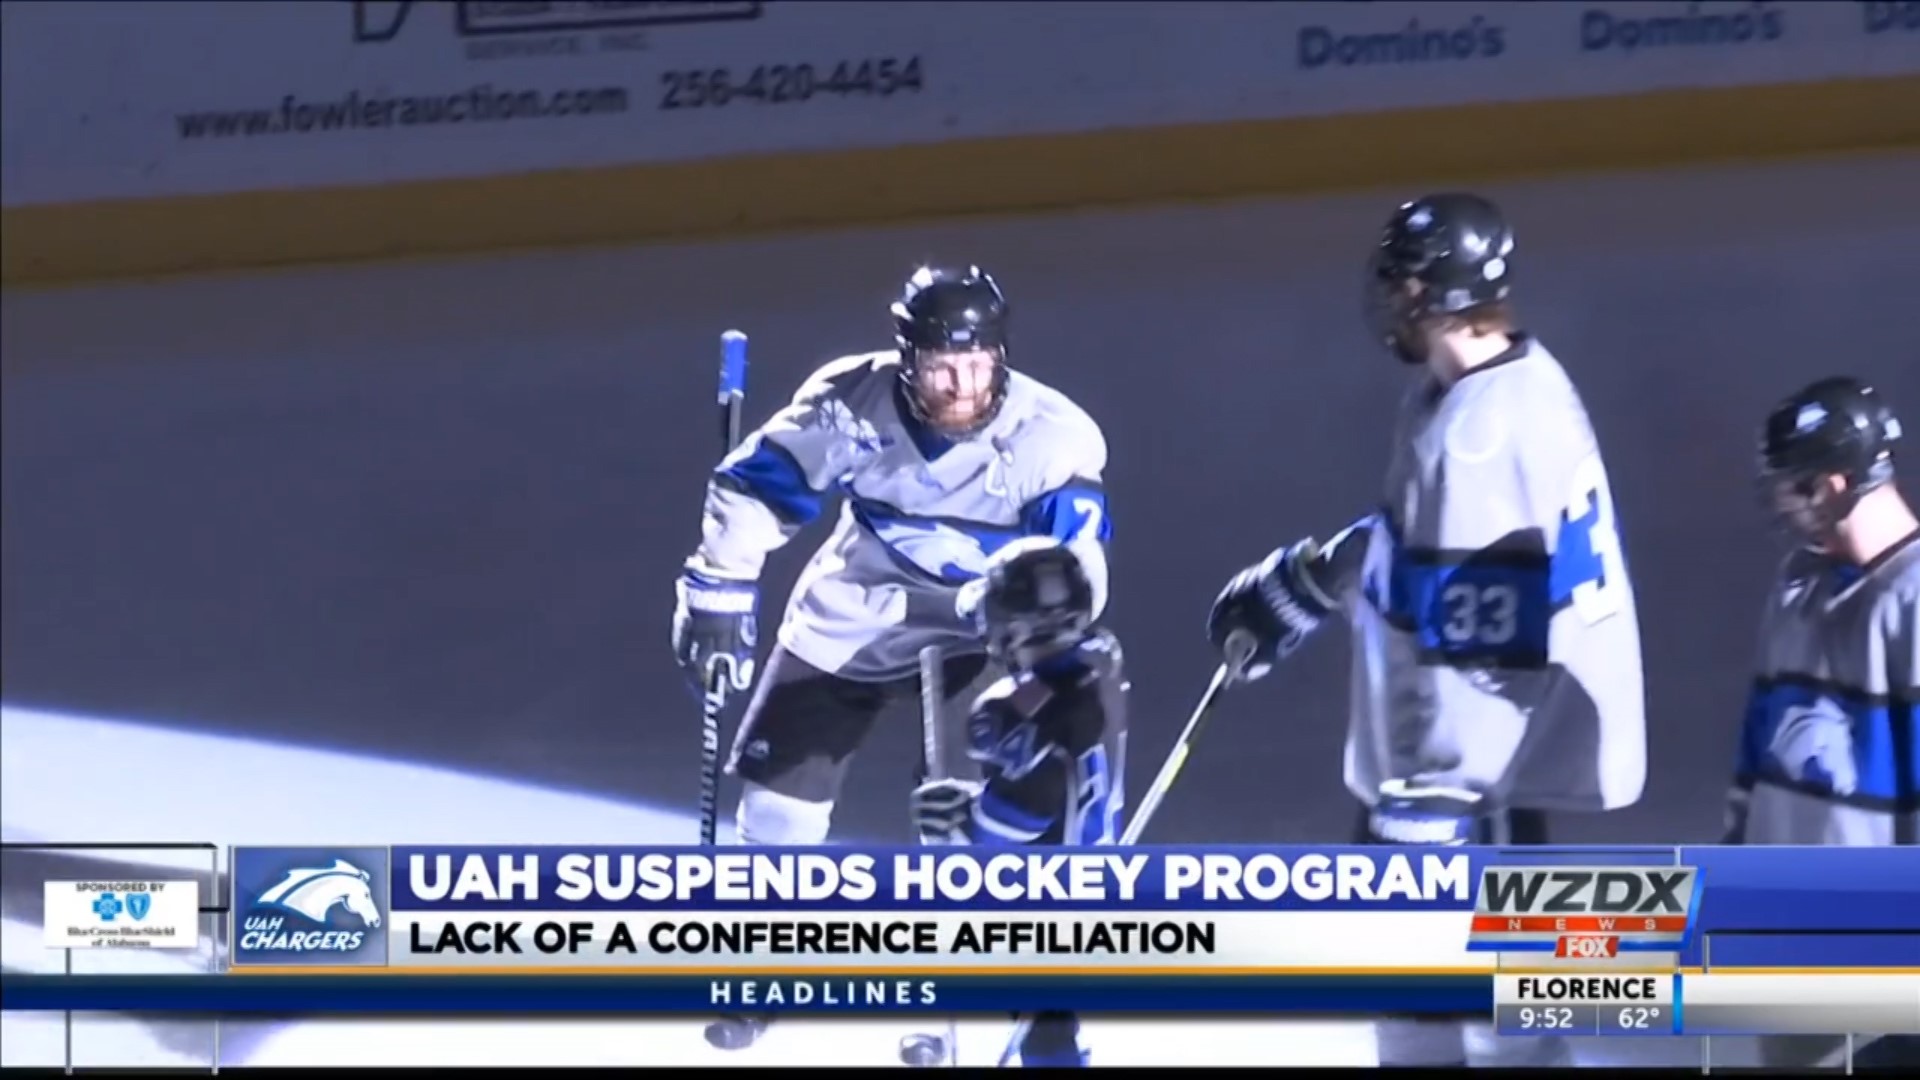 UAH has not secured a conference home for the upcoming season, and therefore must suspend its hockey operations, effective immediately.